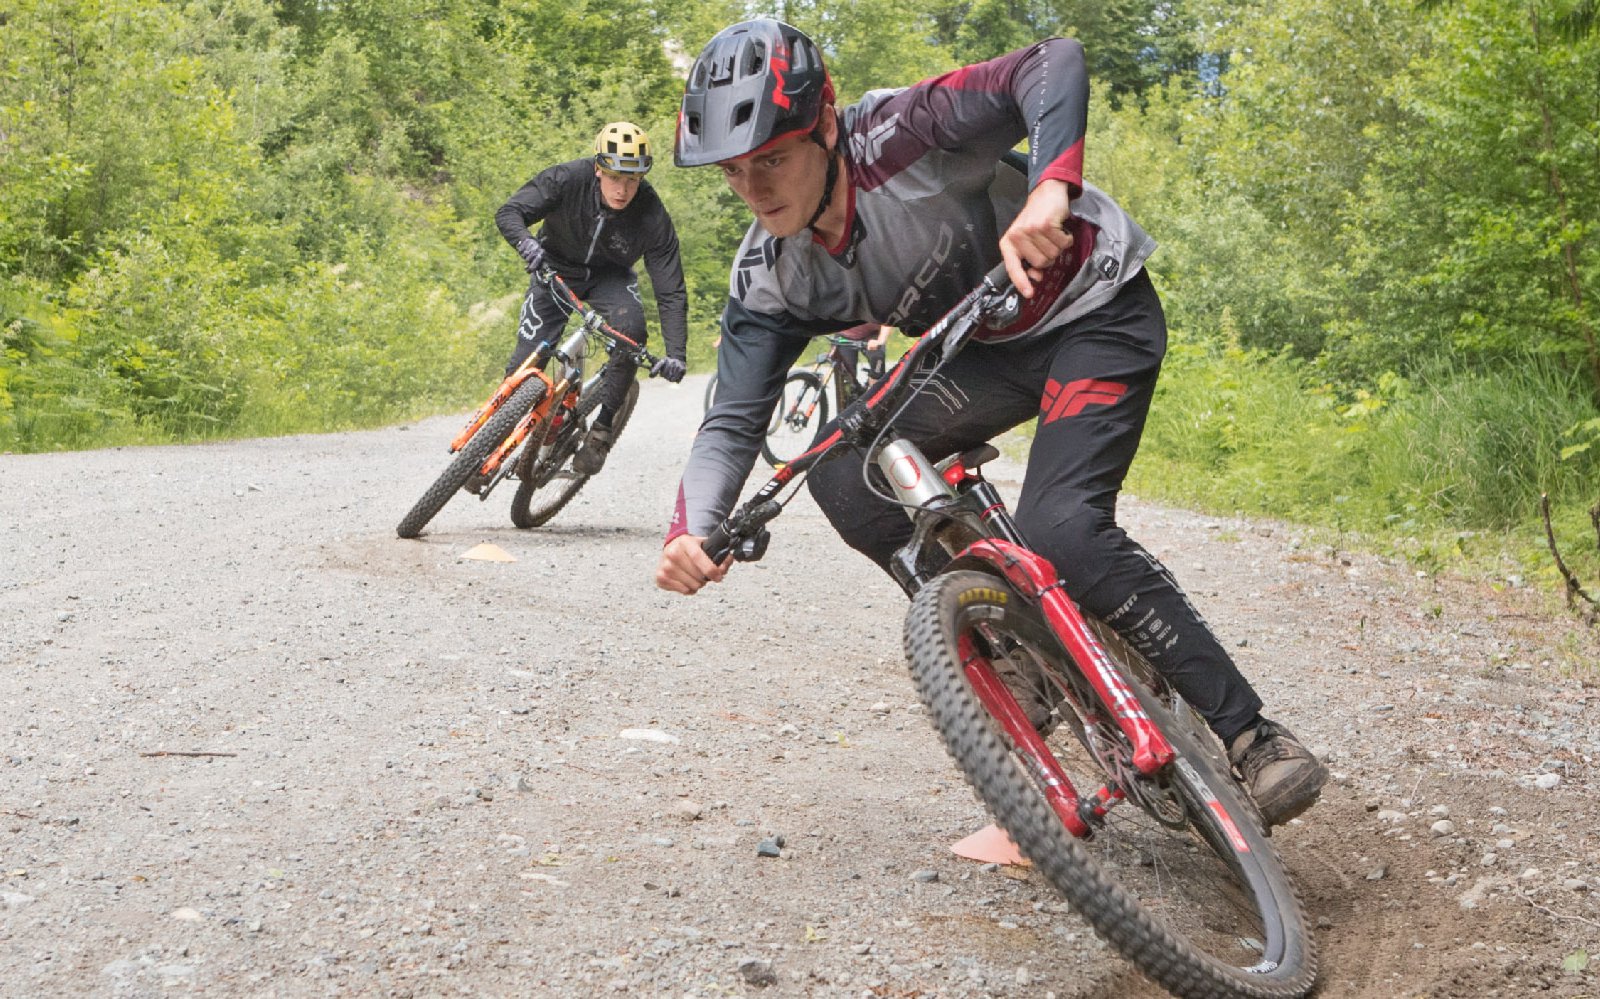 Core exercises for MTB riders: 9 pro rider tips +list+